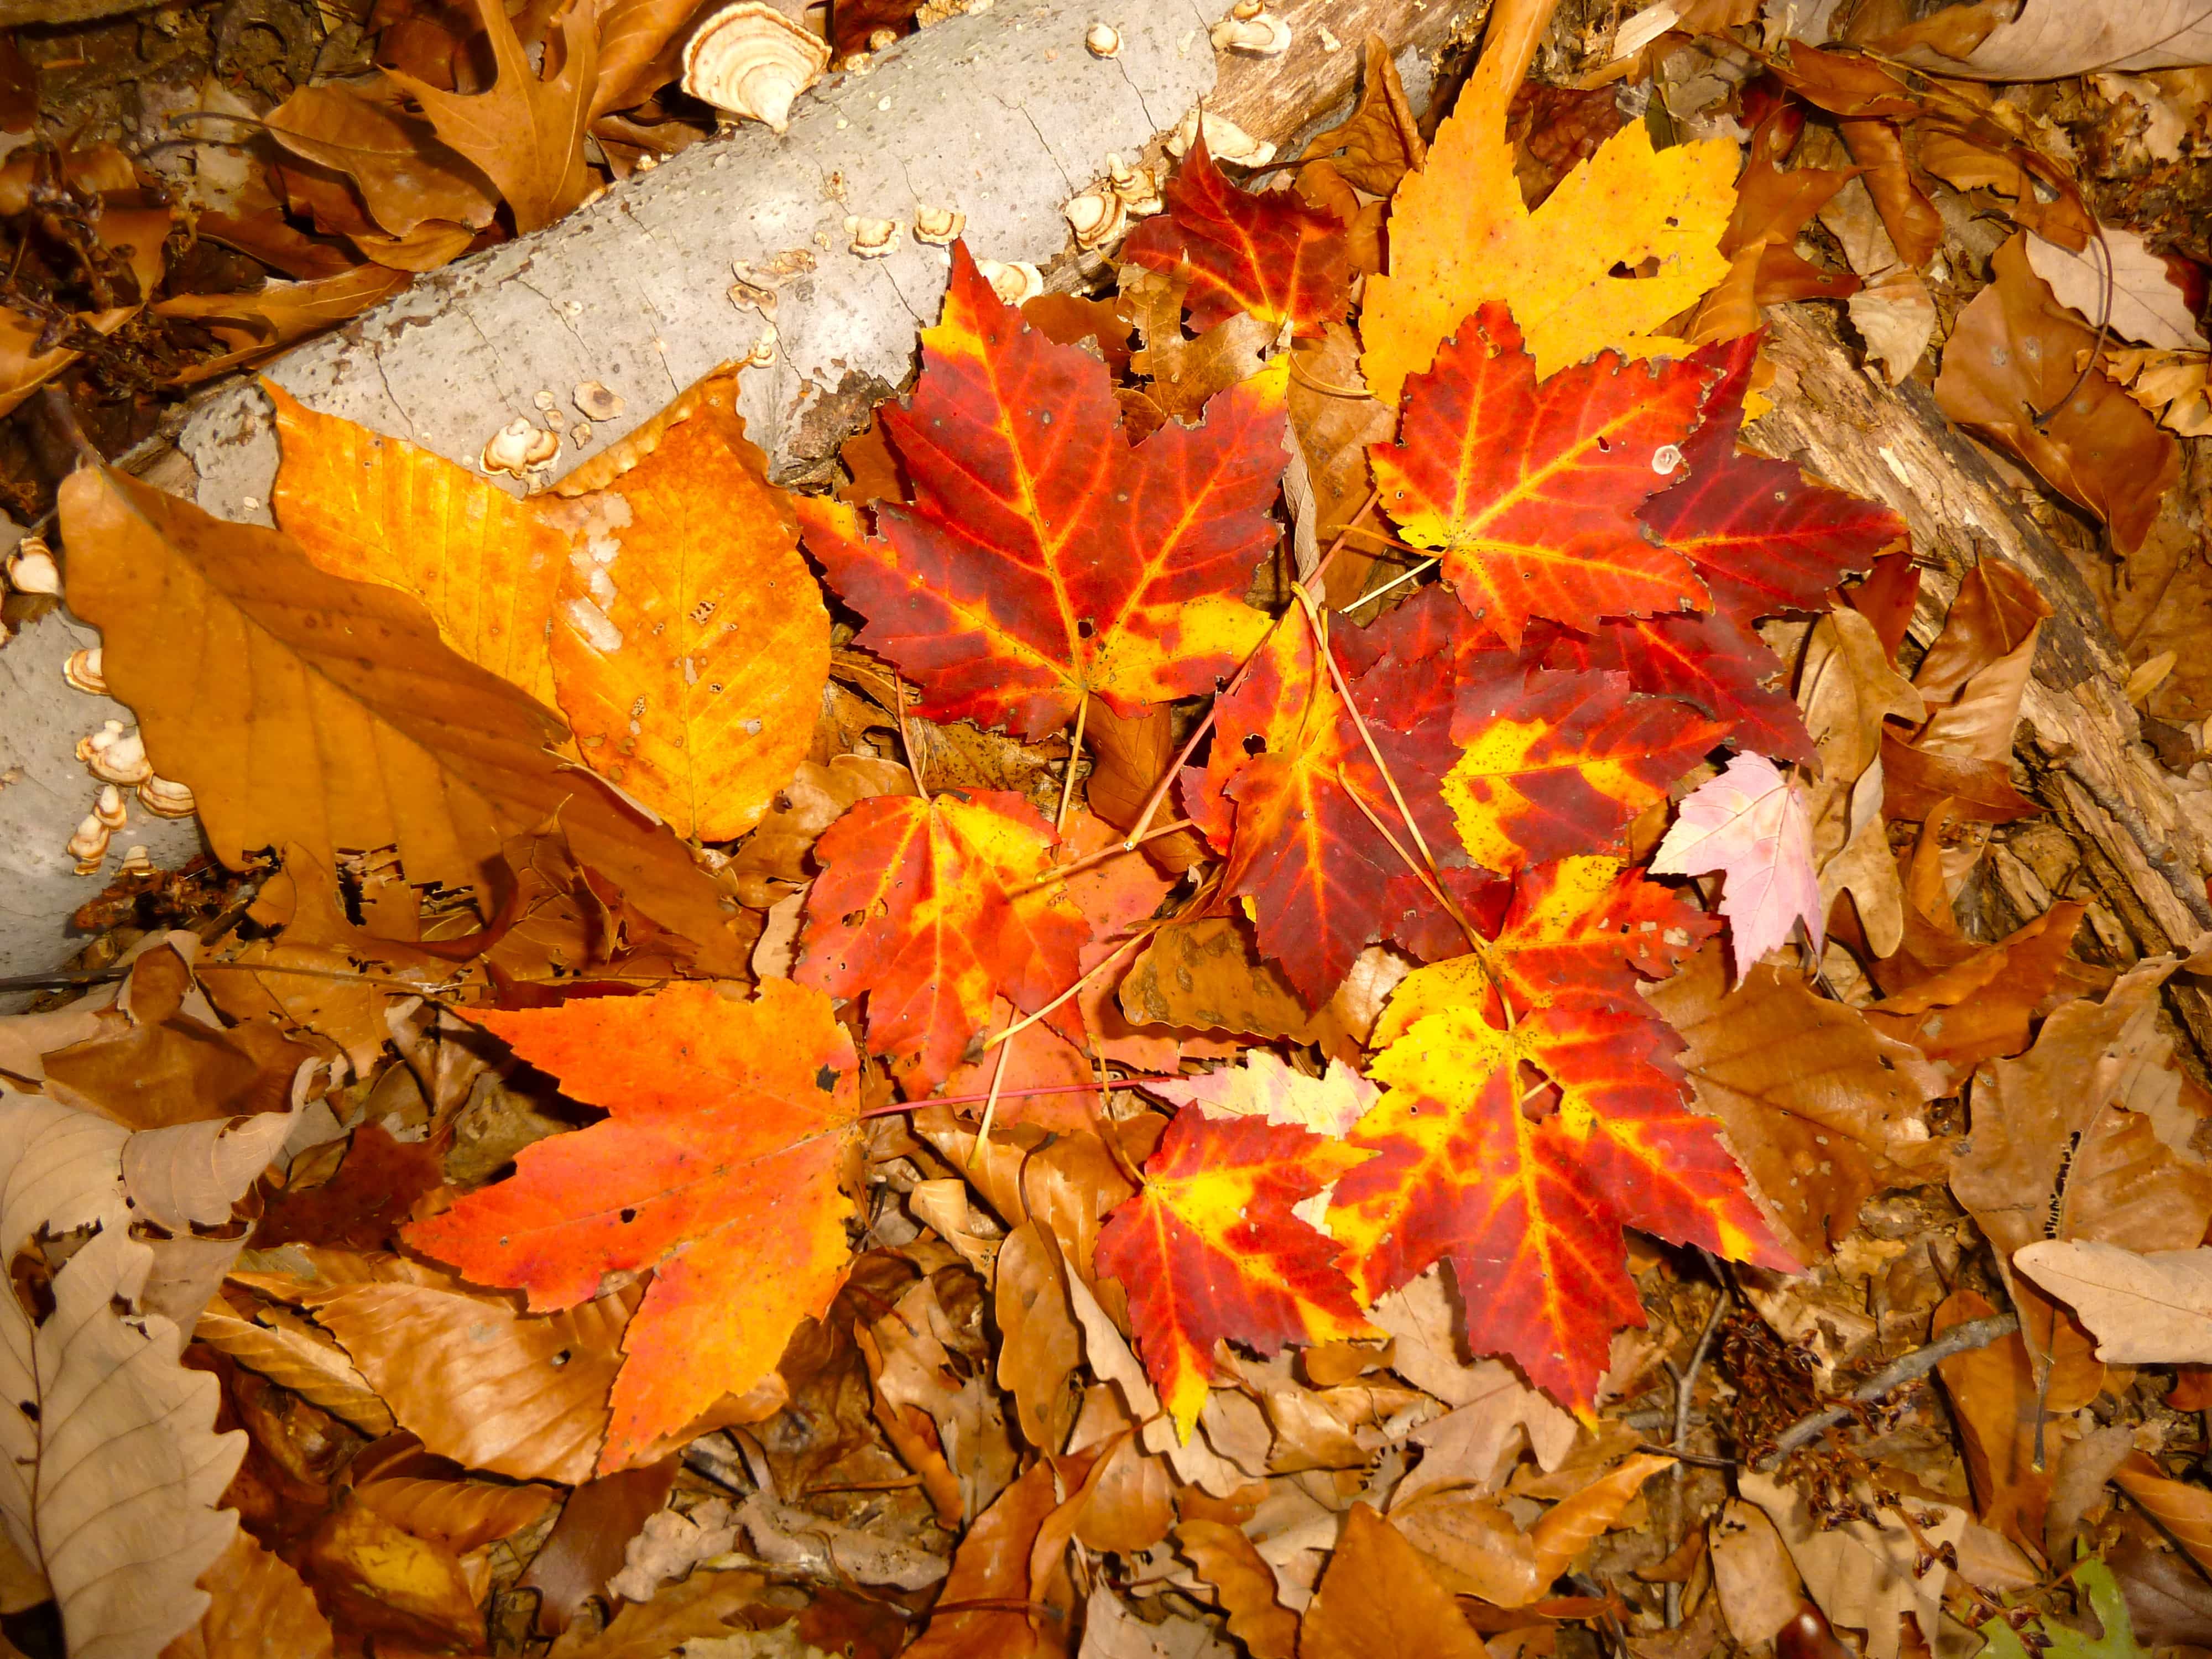 Why Do Leaves Change Colors in the Fall?